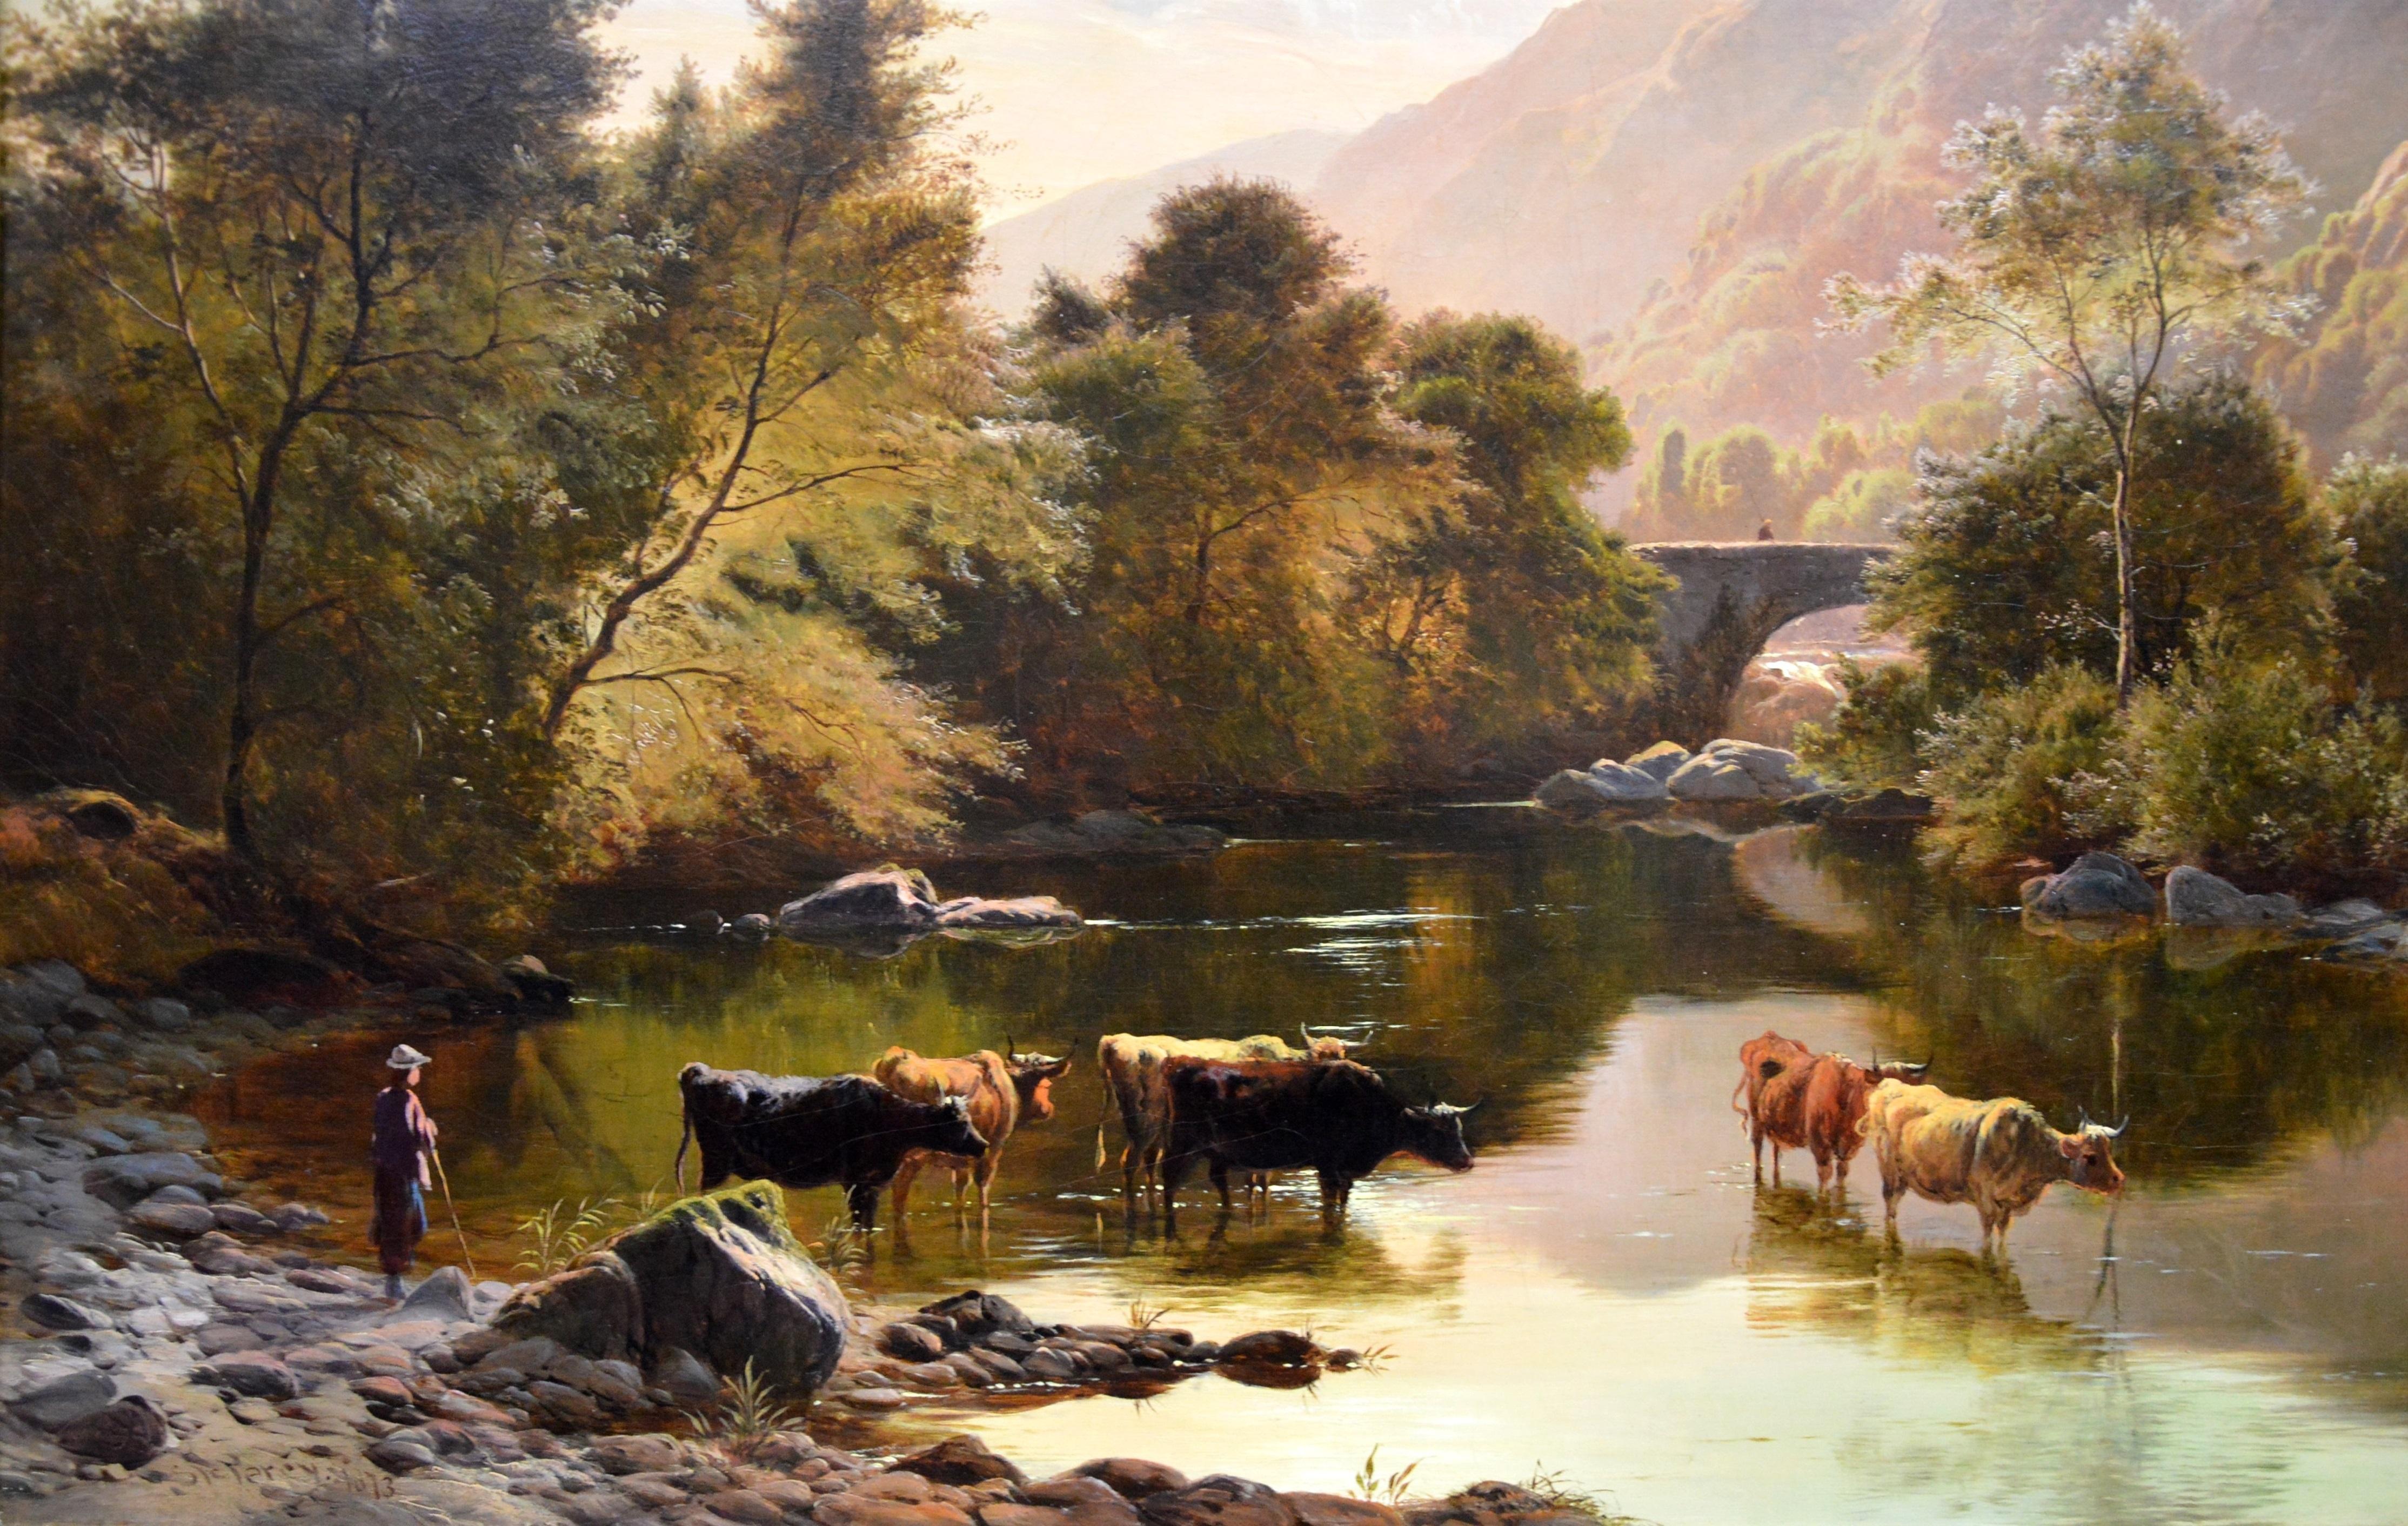 ‘Cnicht from the Glaslyn’ by Sidney Richard Percy (1822-1886). 

The painting – which depicts cattle watering on the River Glaslyn before Cnicht mountain in Snowdonia – is signed by the artist and dated 1873 in which year it was exhibited at the